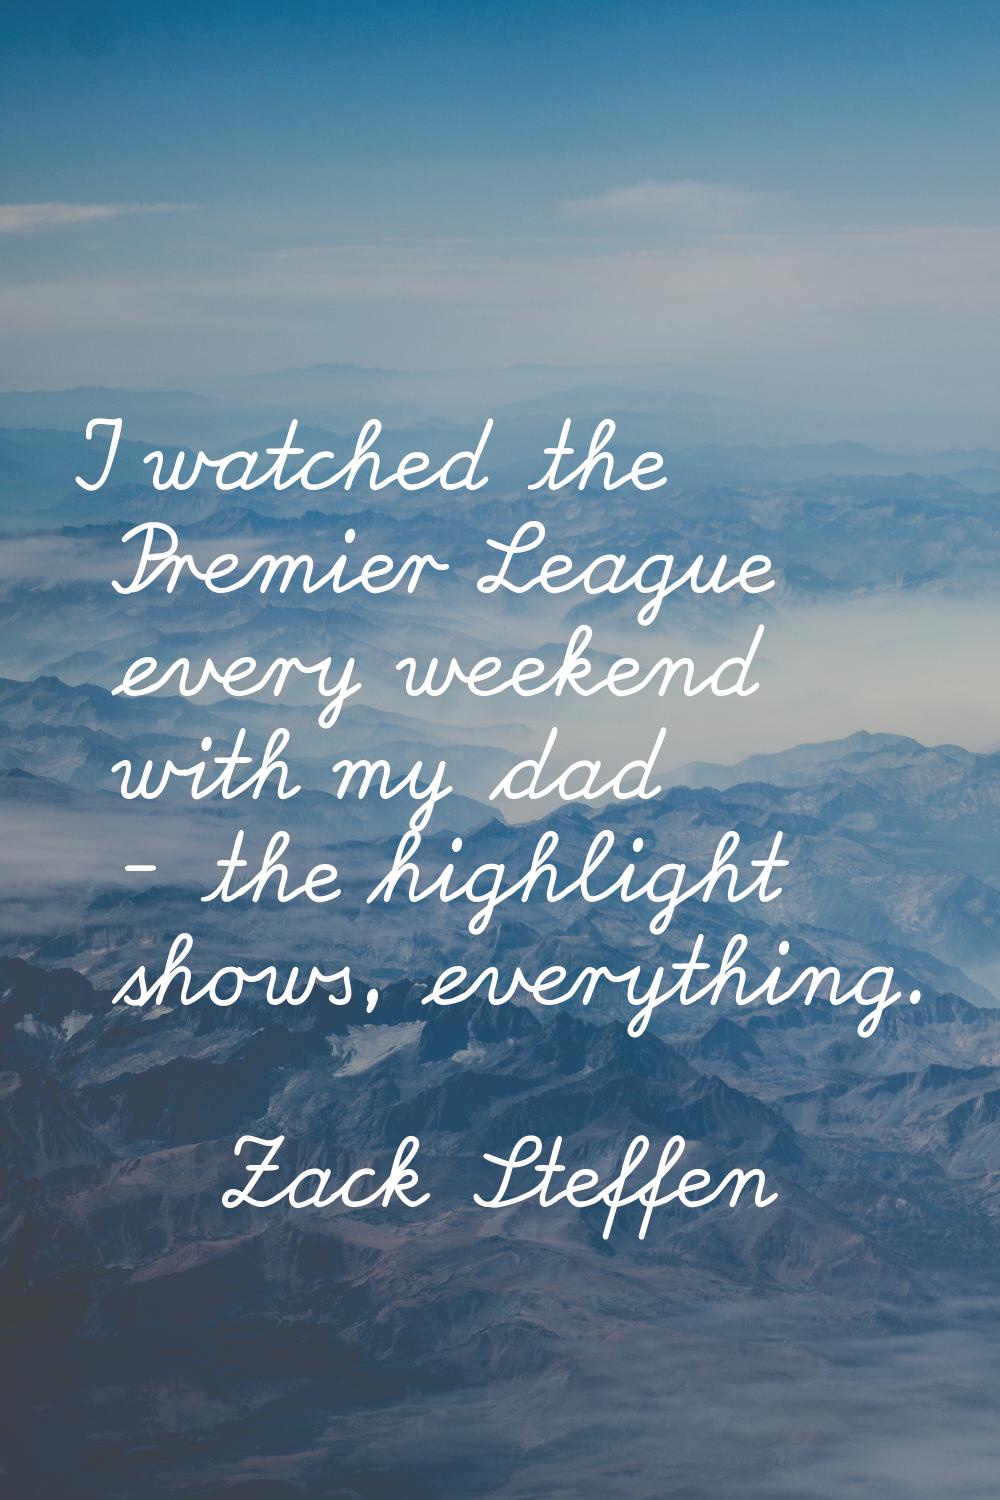 I watched the Premier League every weekend with my dad - the highlight shows, everything.